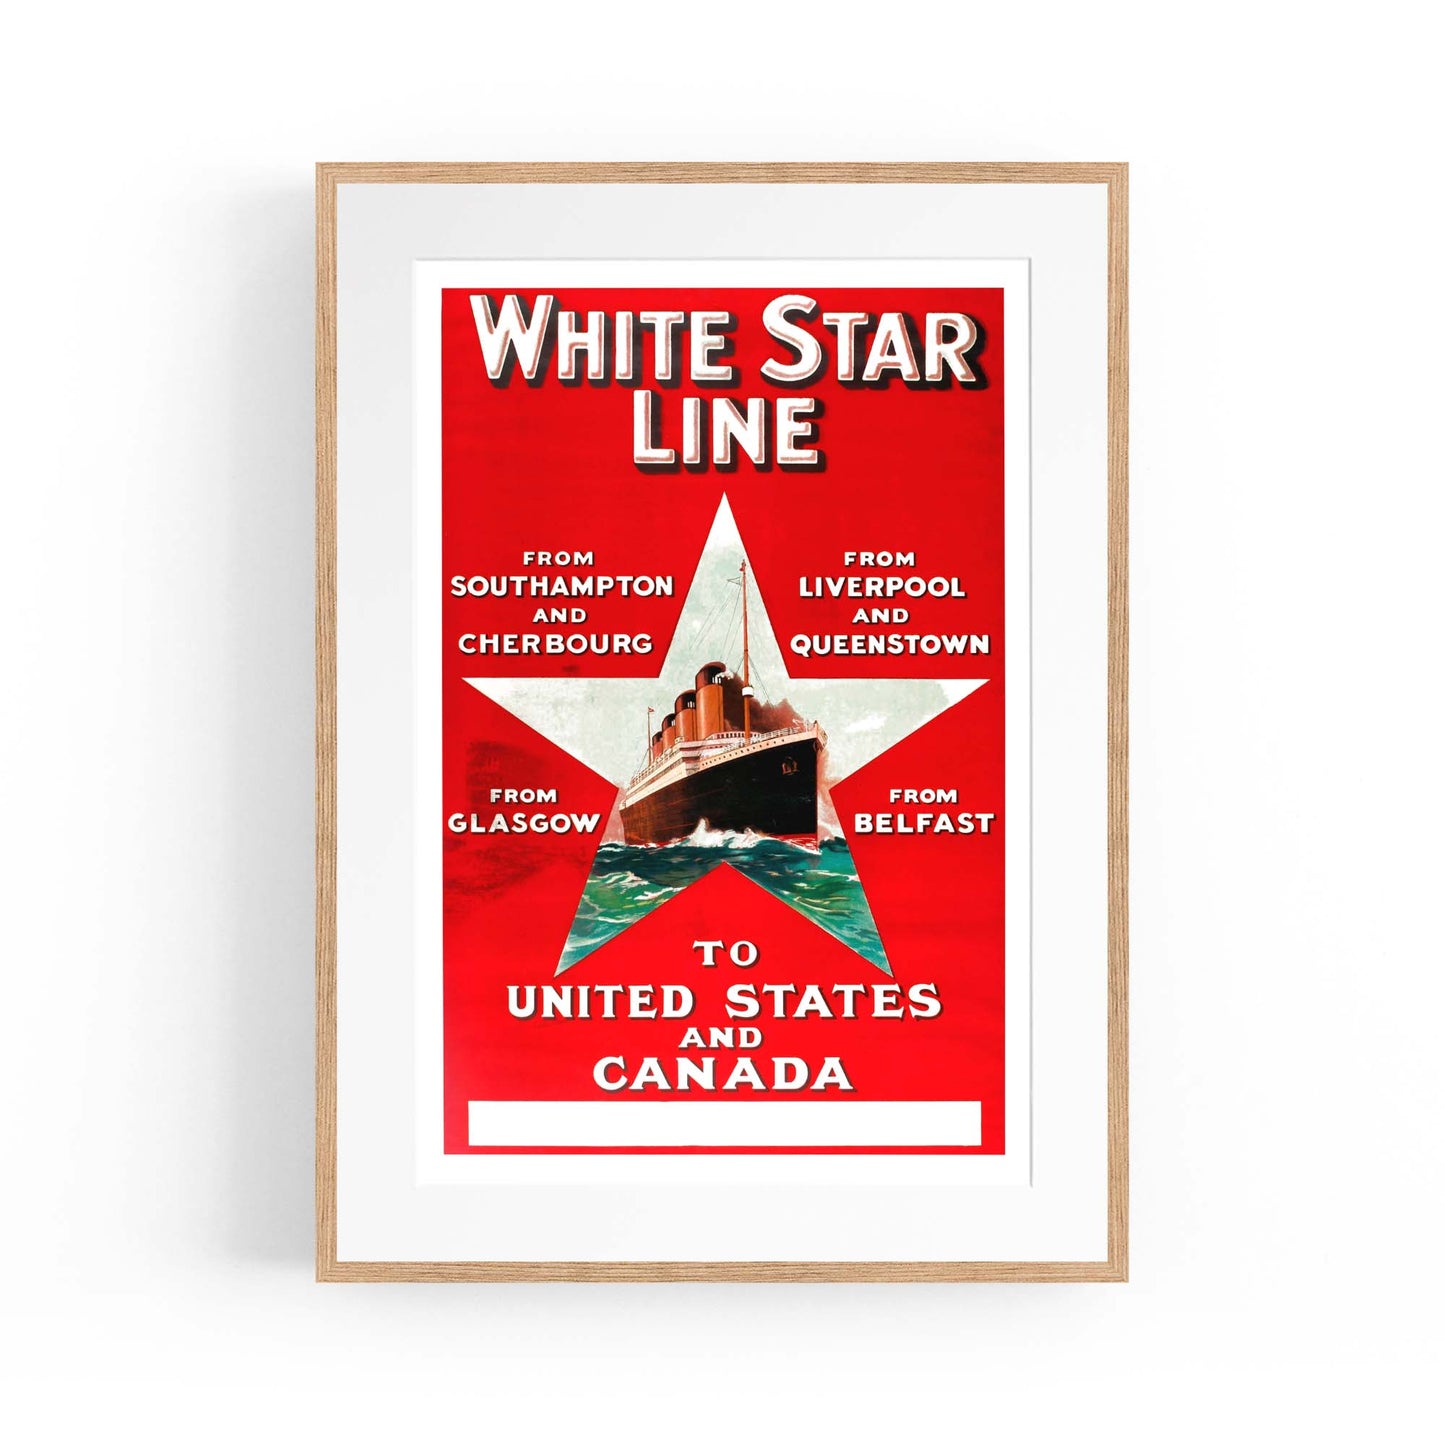 White Star Line Vintage Shipping Advert Wall Art #3 - The Affordable Art Company